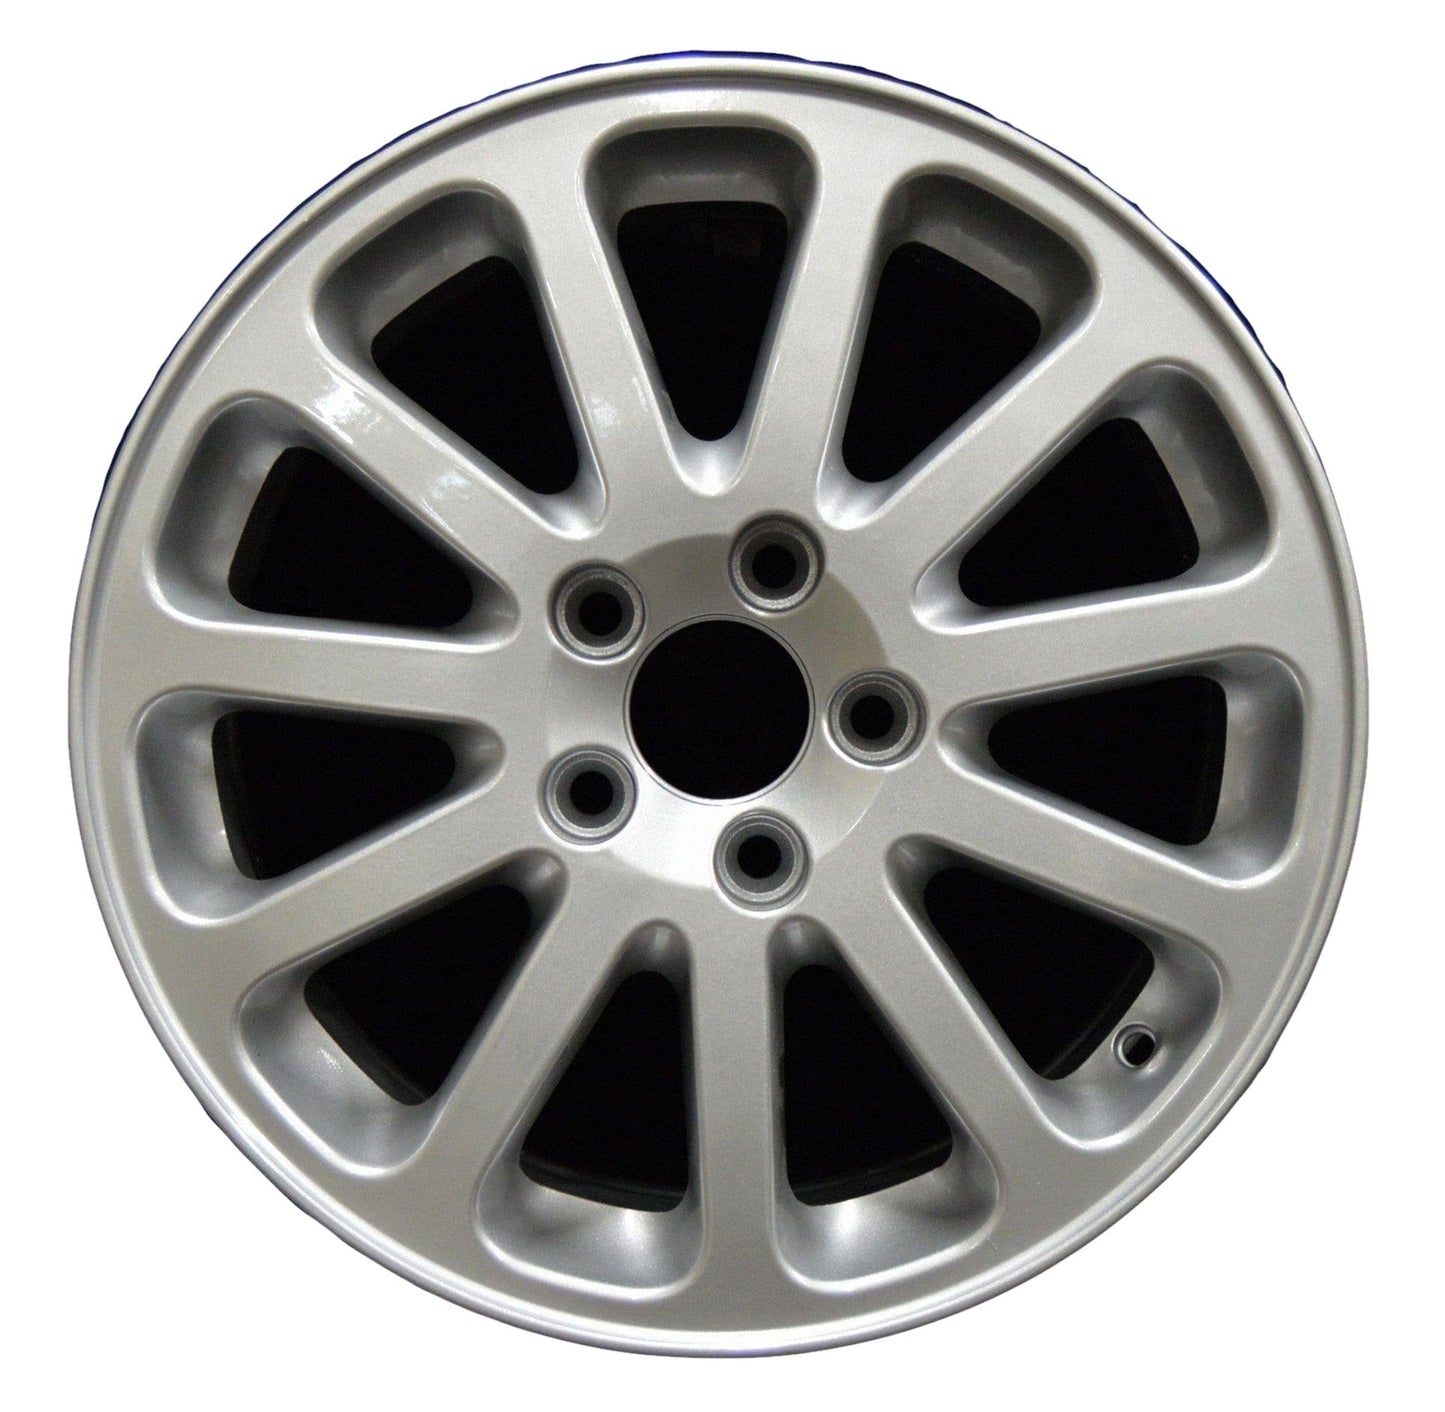 Volvo 60 Series  2007, 2008, 2009 Factory OEM Car Wheel Size 16x7 Alloy WAO.70210.PS10.FF